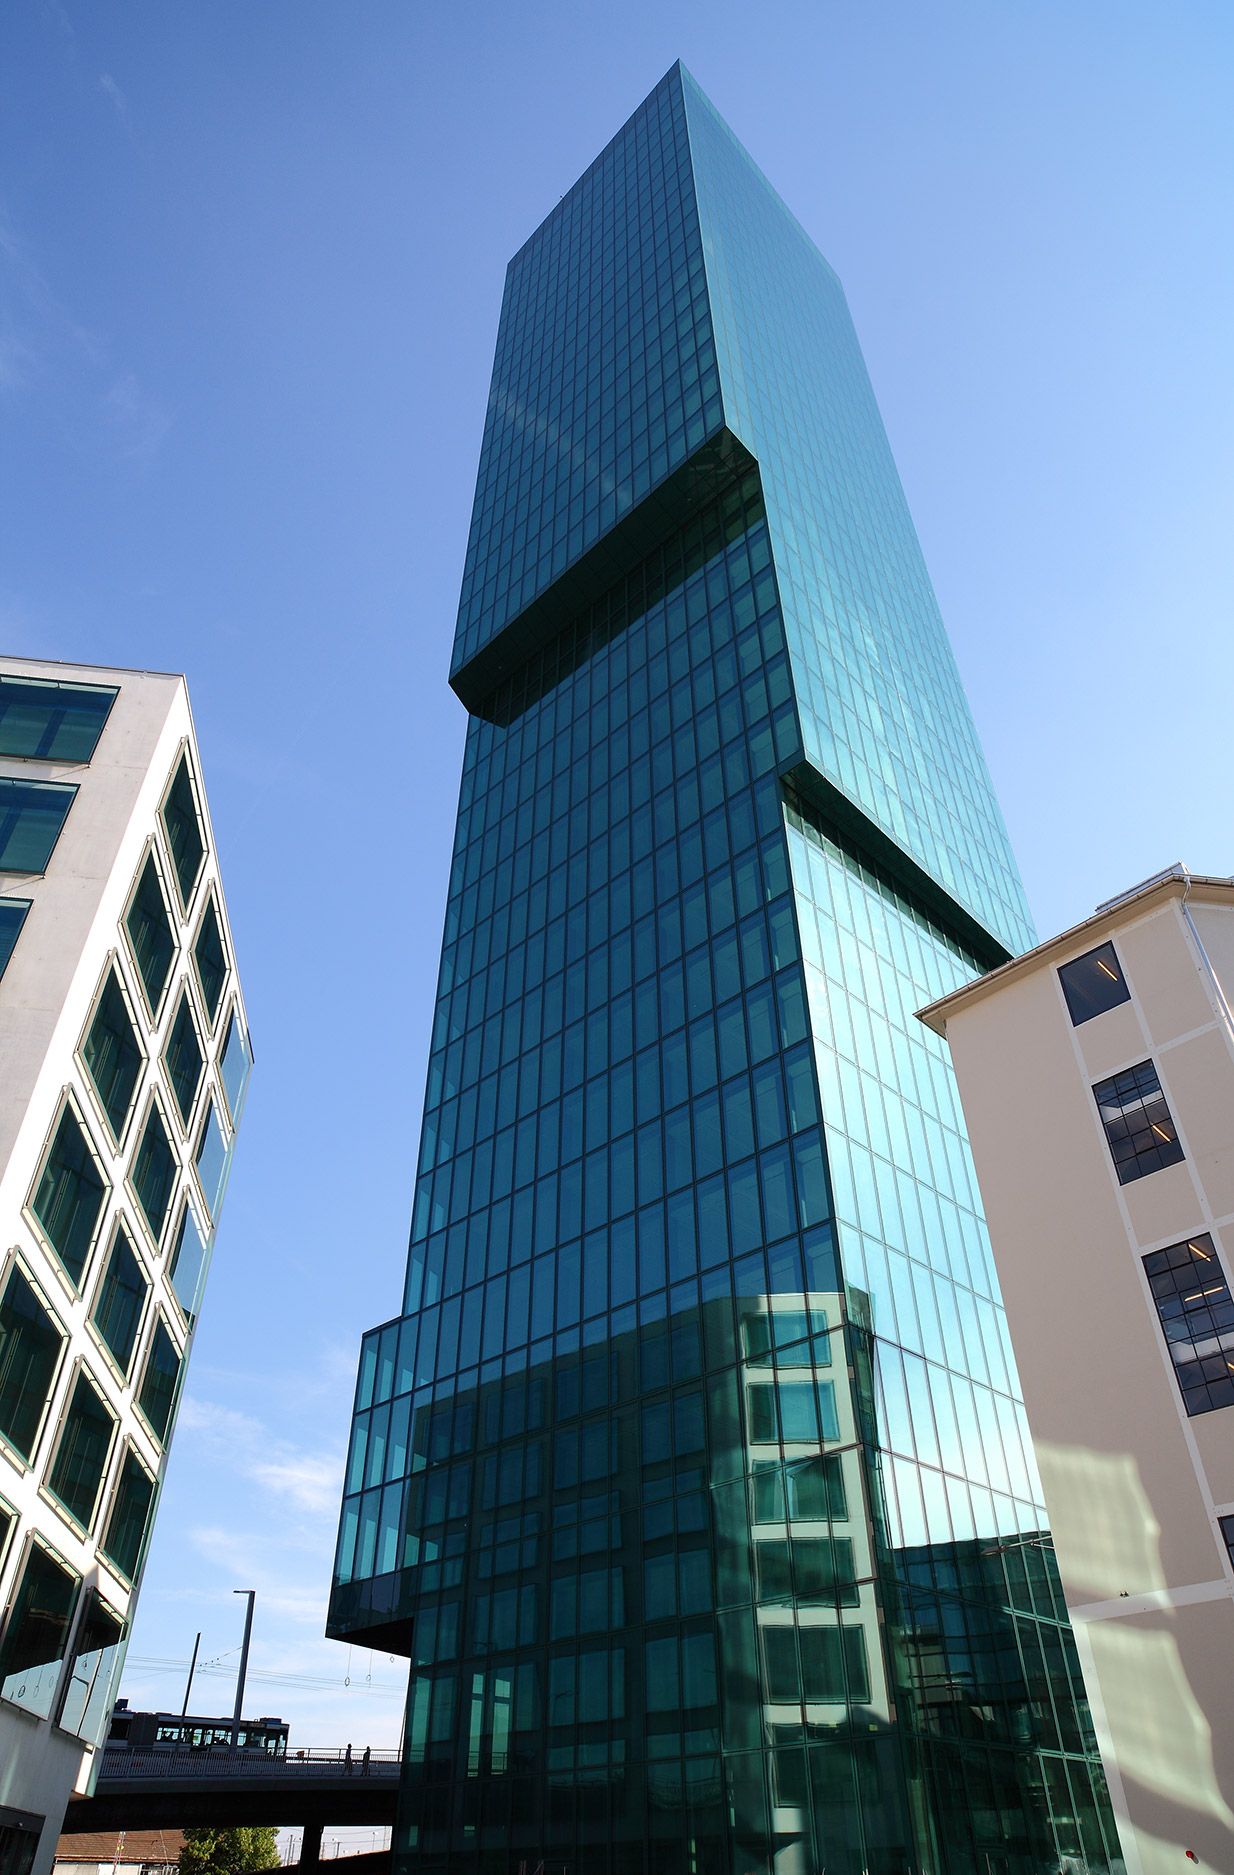 Prime Tower Office High-rise with Annex Buildings Cubus and Diagonal, Maag-Areal